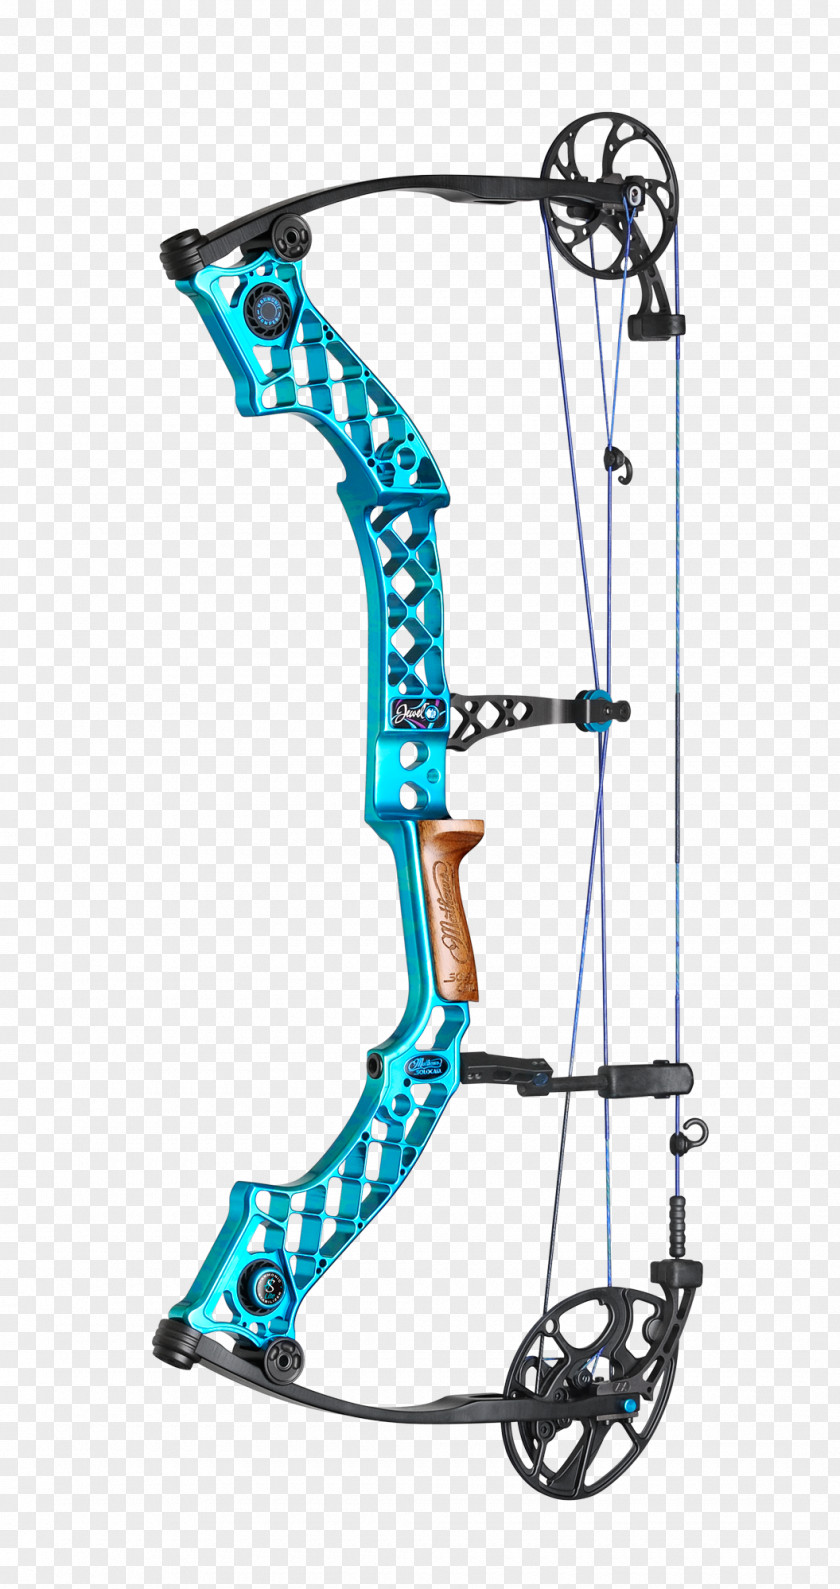 Teal Color Compound Bows Bow And Arrow Archery Bowhunting PNG